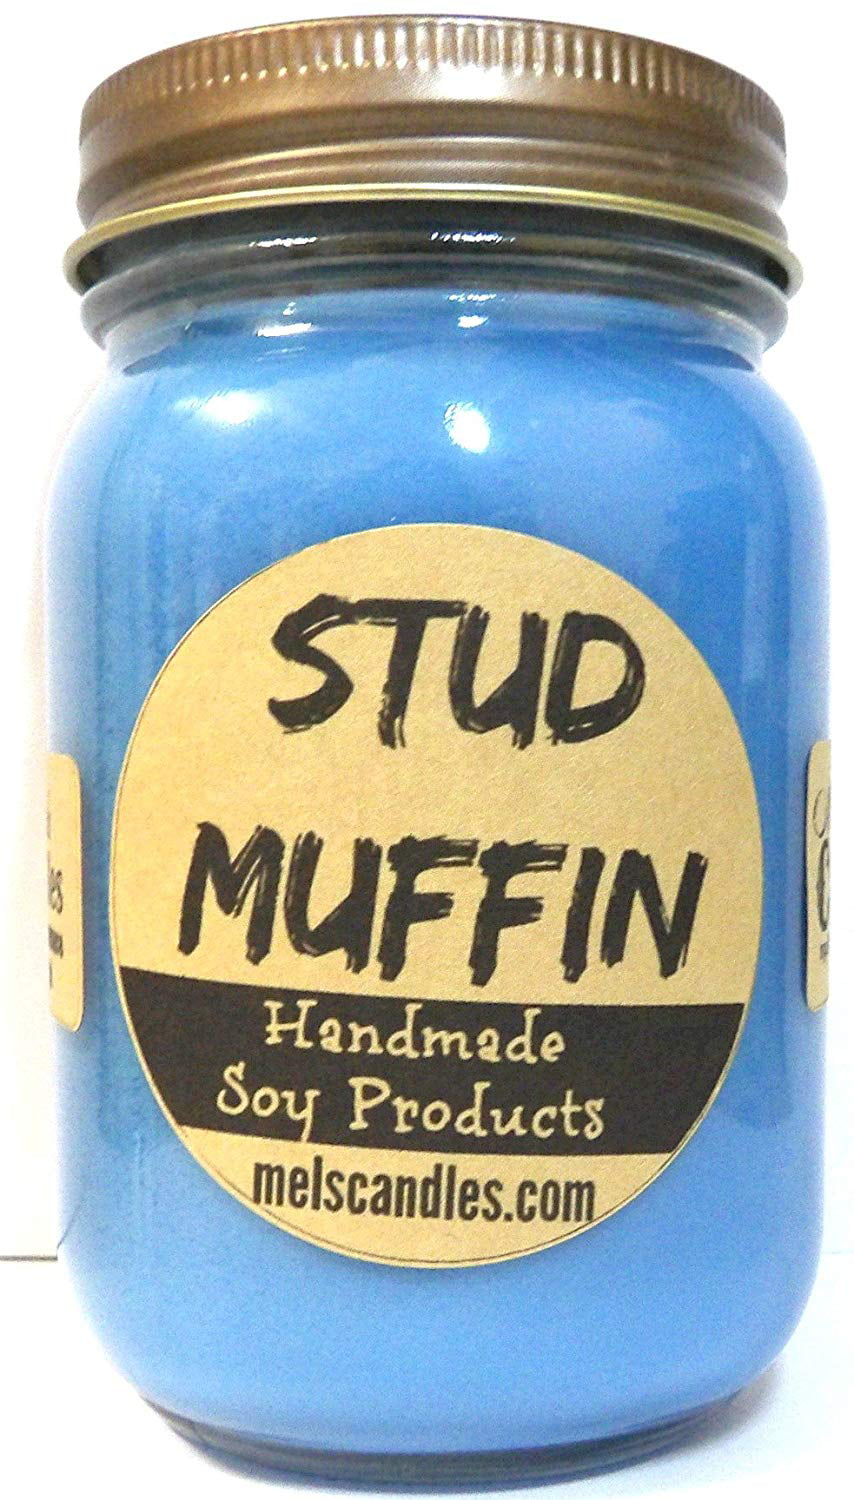 Stud Muffin Novelty 16 Ounce Country Jar 100 Percent Soy Candle Handmade in US 